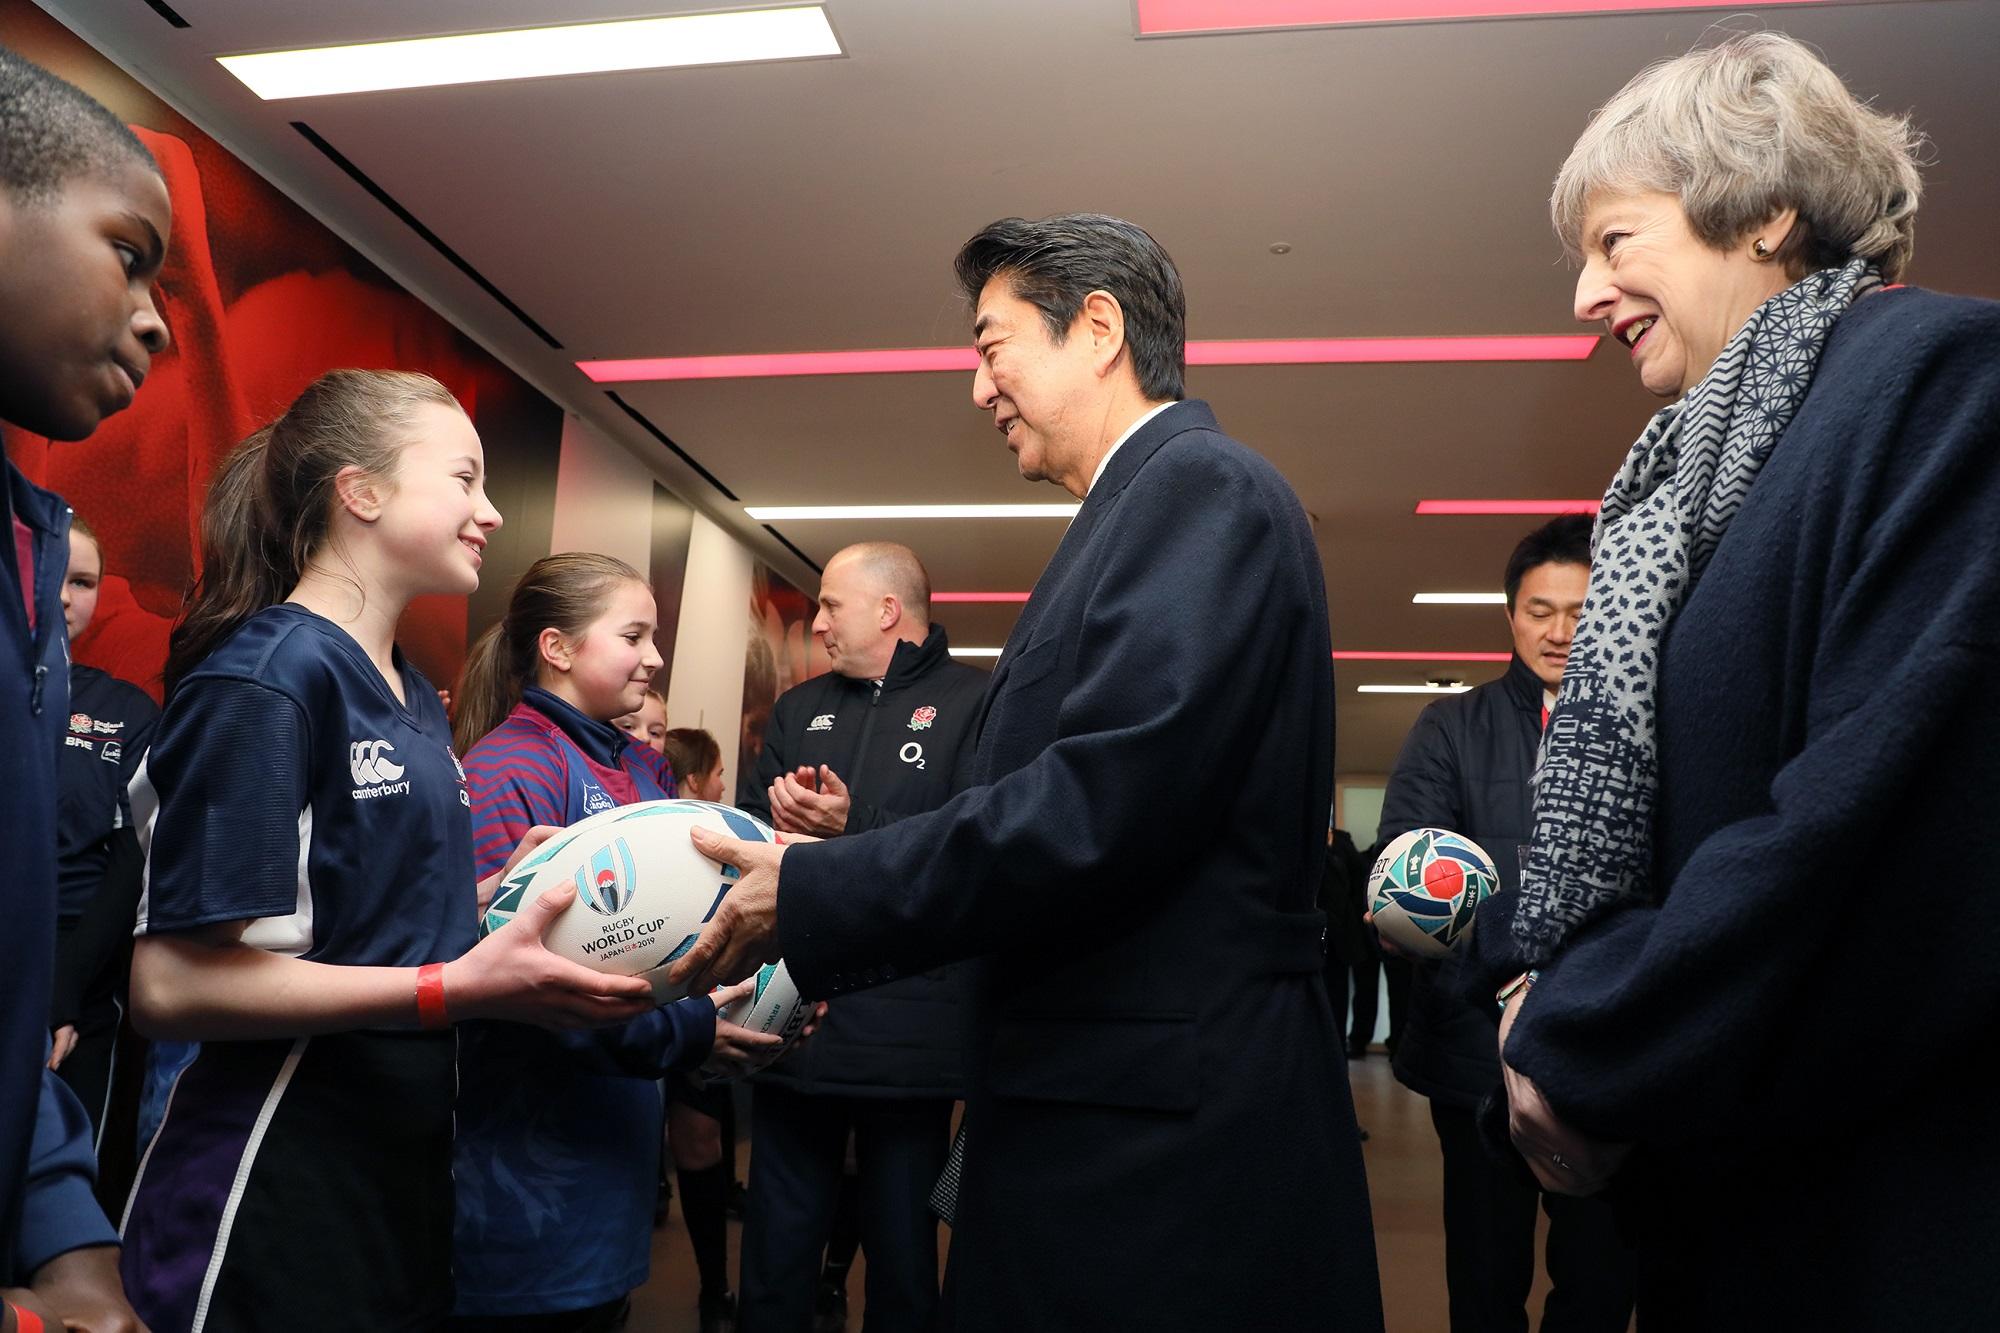 Photograph of the Prime Minister interacting with local children